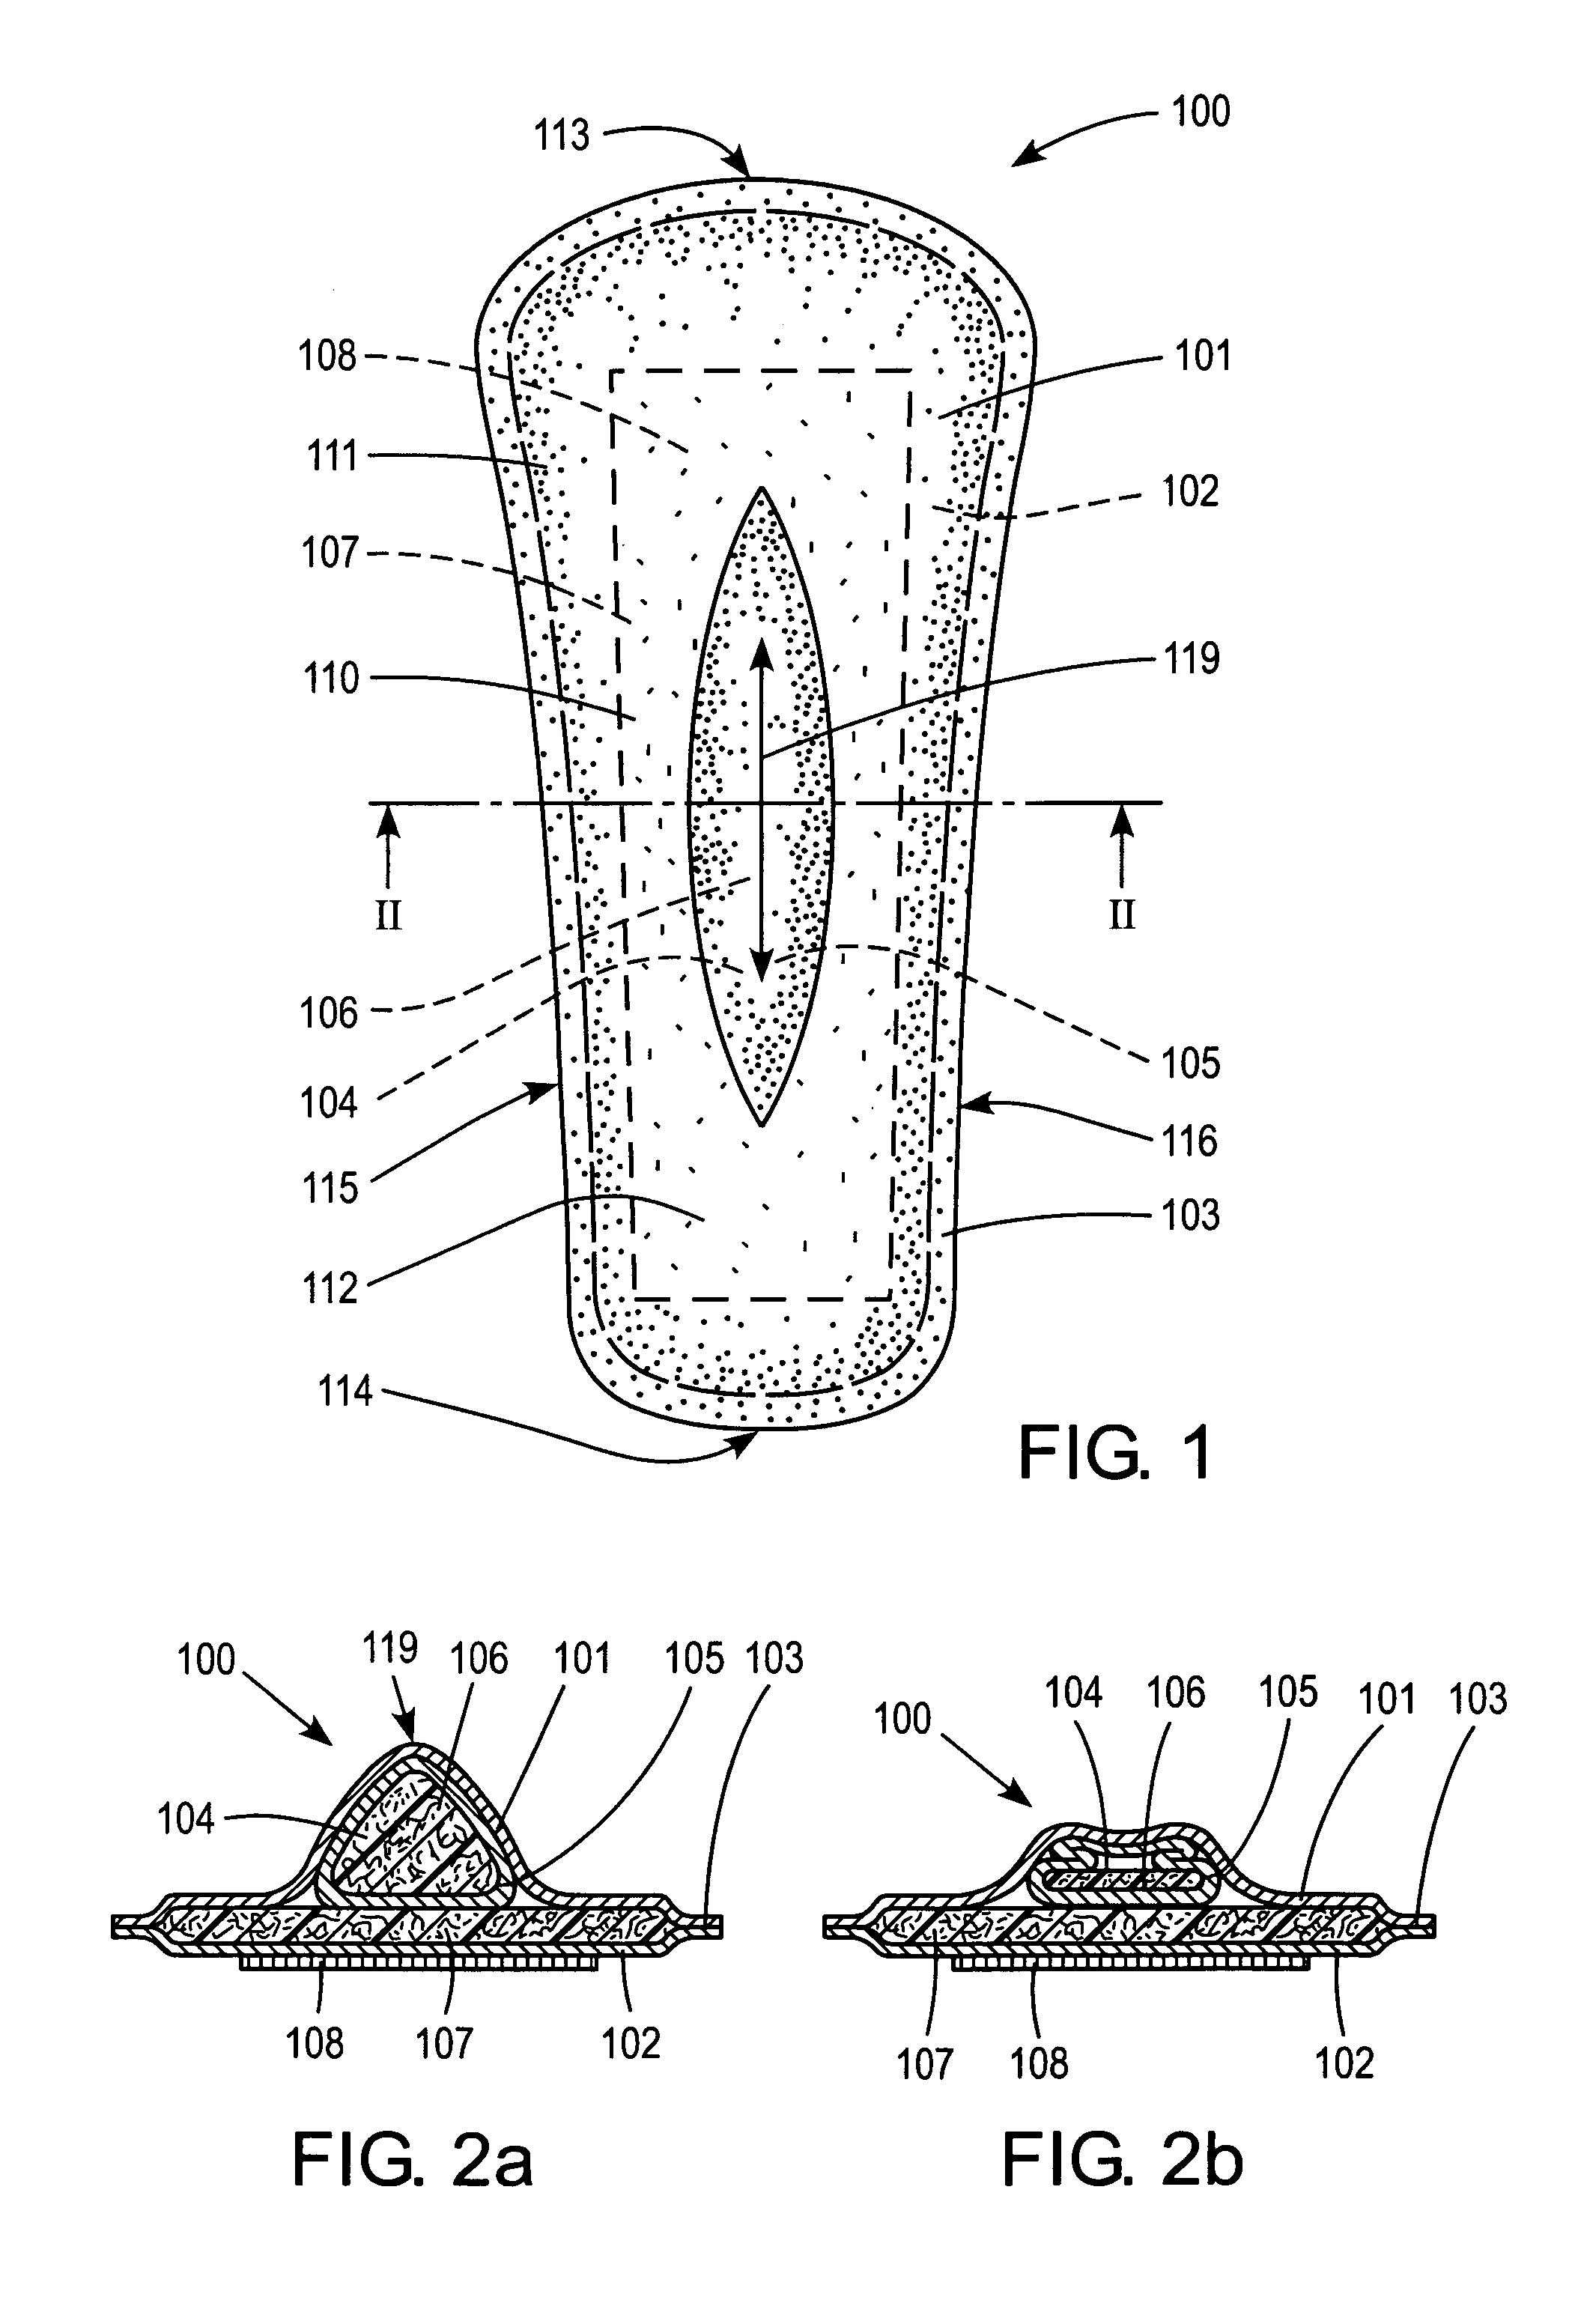 Absorbent article comprising a liquid-permeable material layer